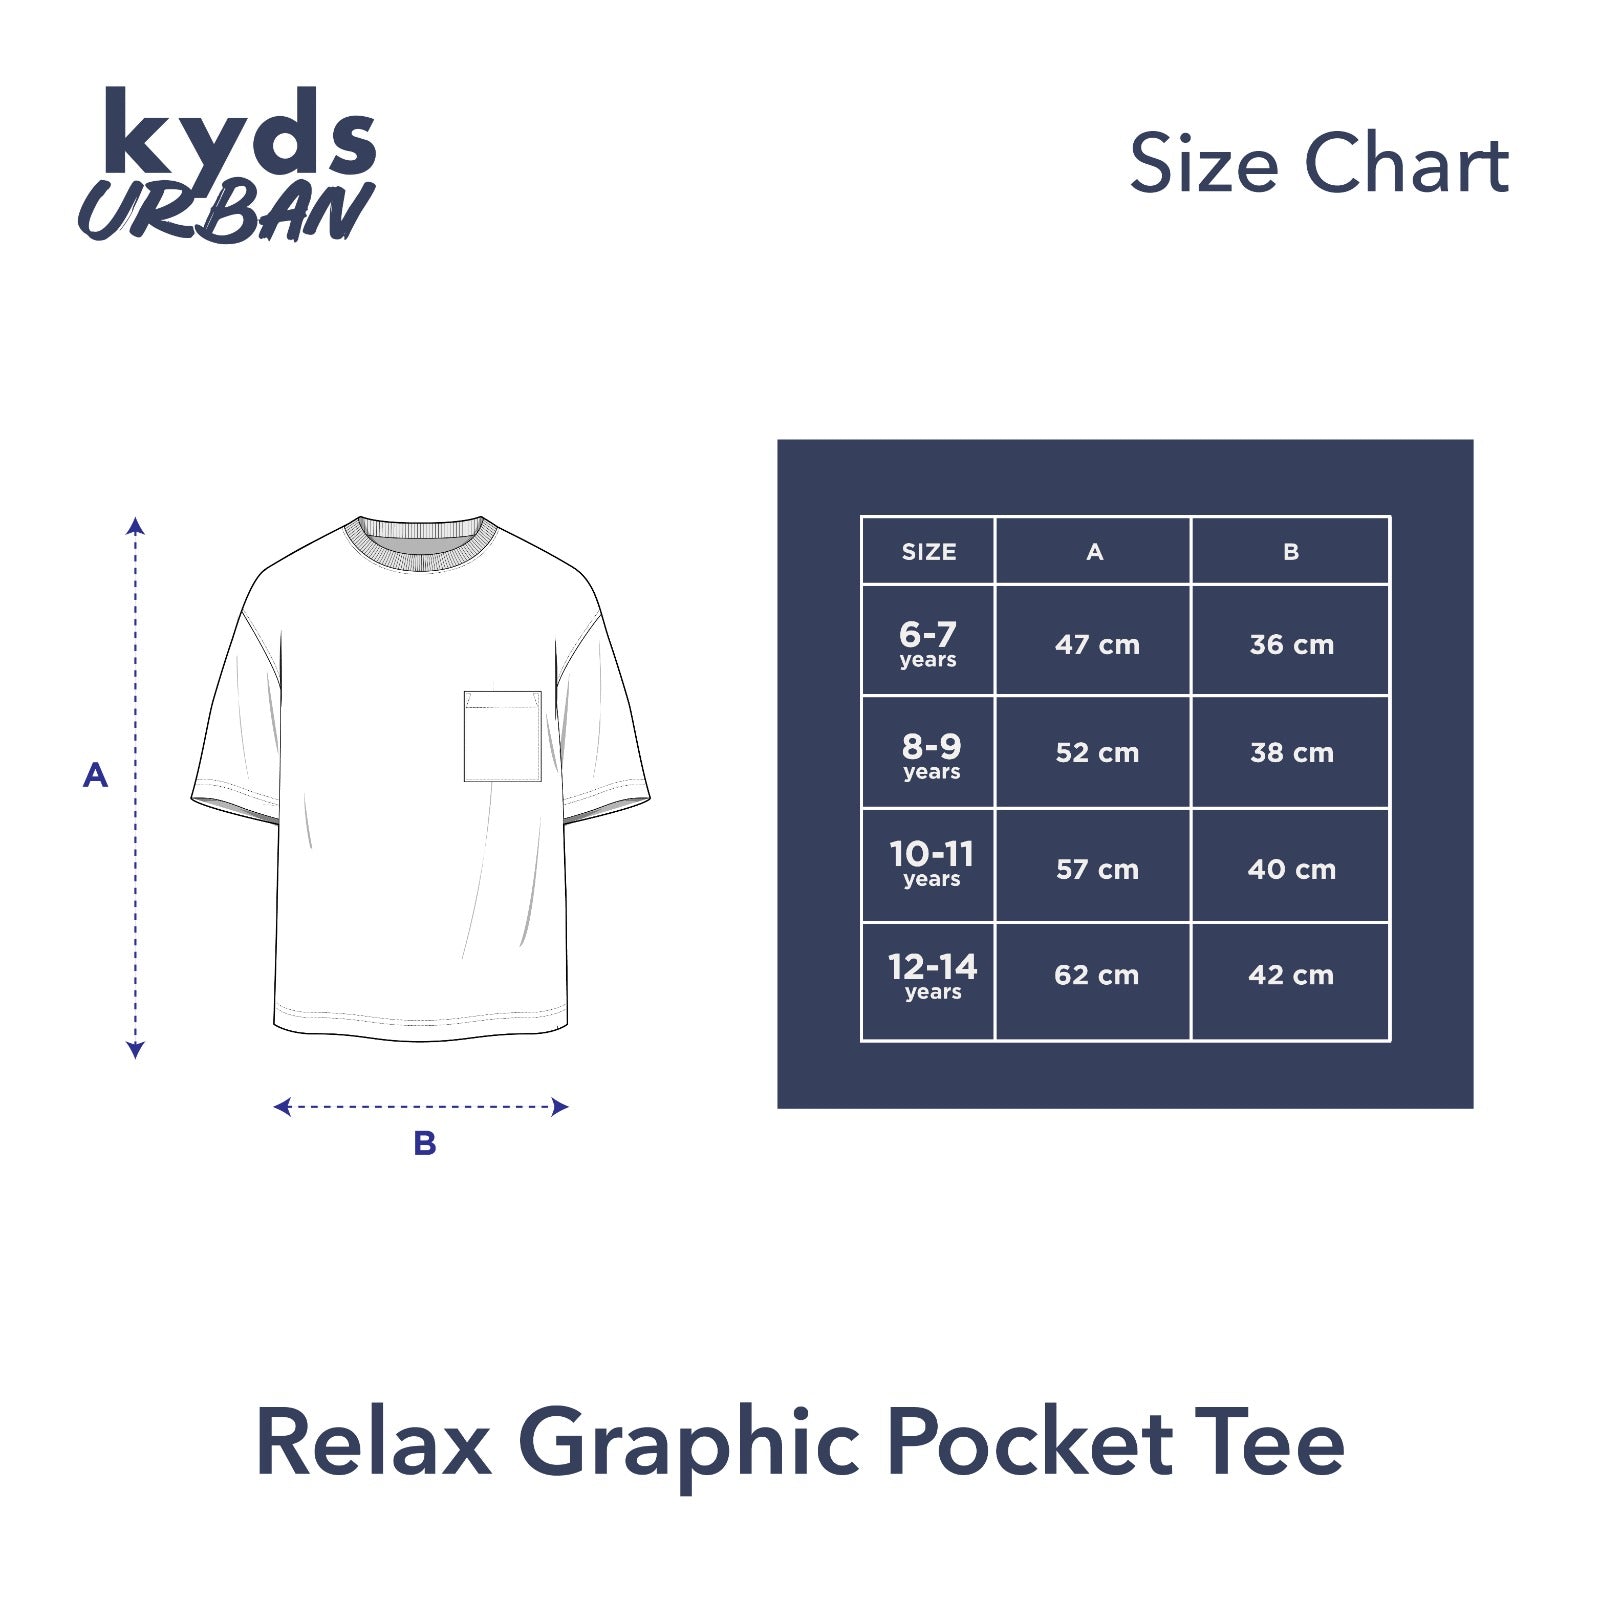 Relax Graphic Pocket Tee